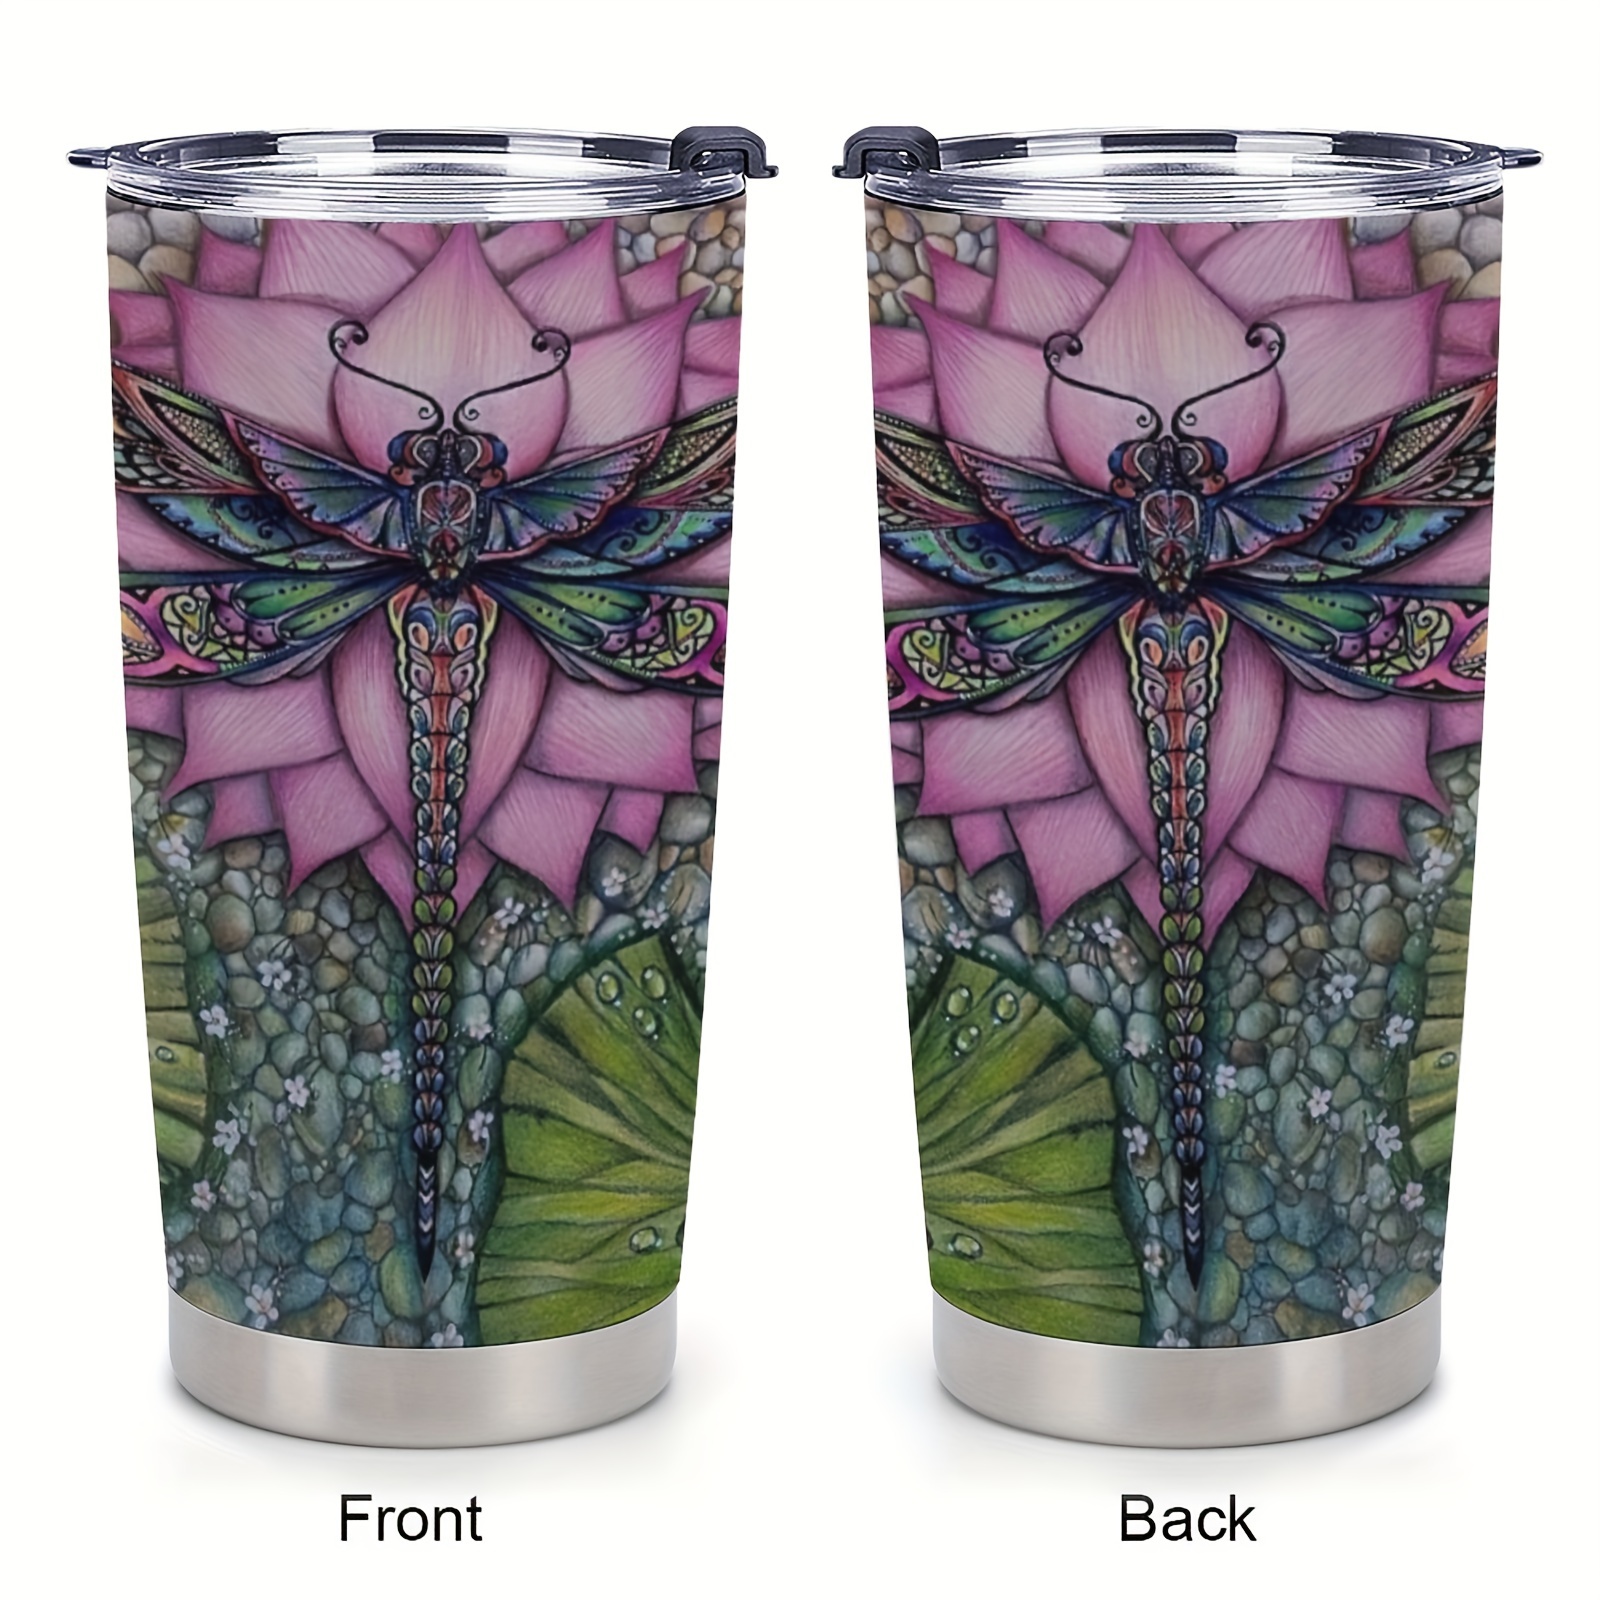 

1pc 20oz Dragonfly Gifts, Mom, Wife, Daughter, Friend, Lotus Flower And Dragonfly Cup, Double Wall Vacuum Cup Insulated Travel Coffee Mug With Lid